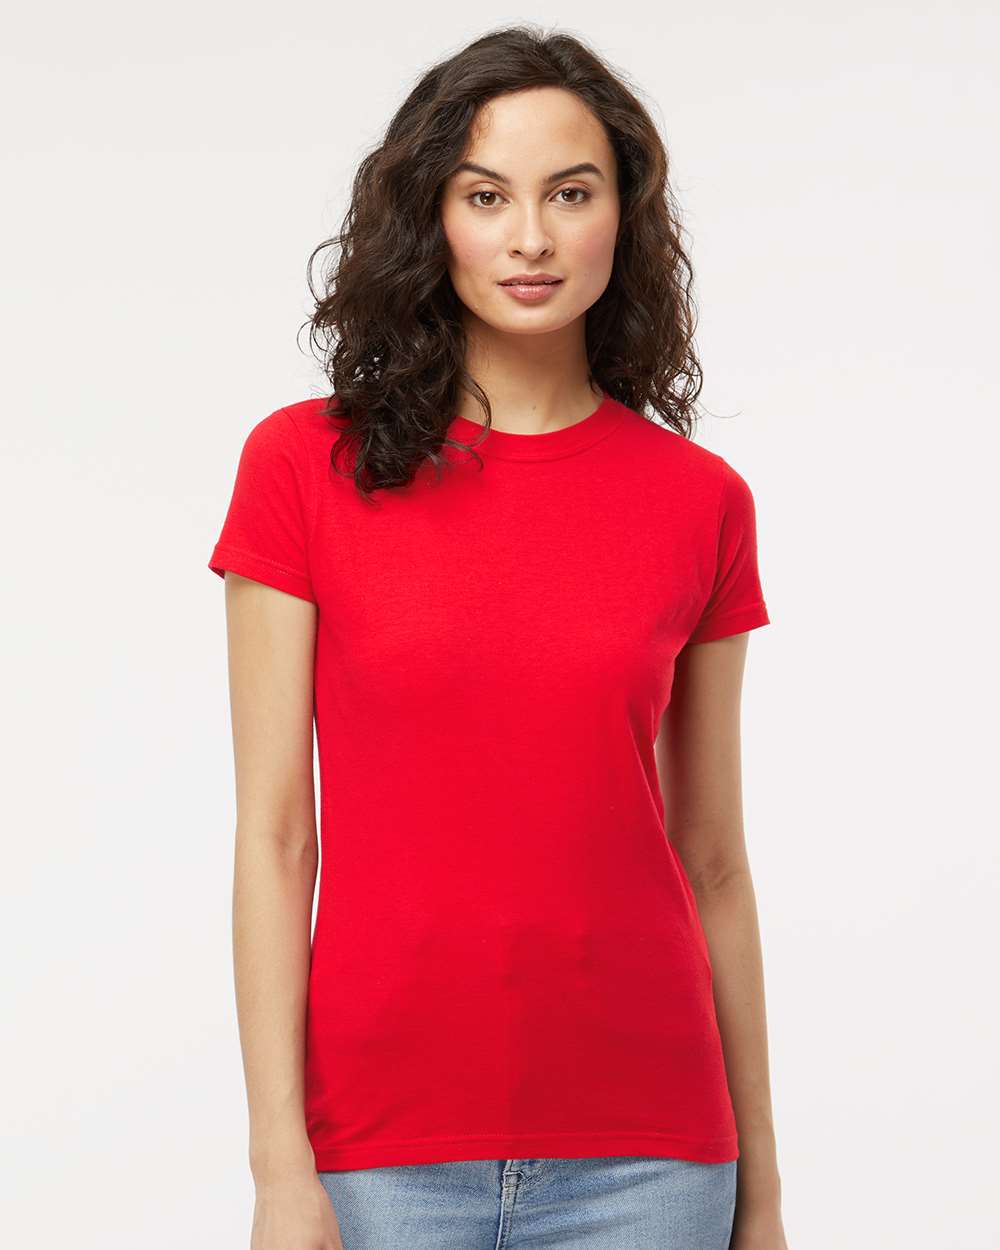 M&O Women's Fine Jersey T-Shirt 4513 #colormdl_Fine Red